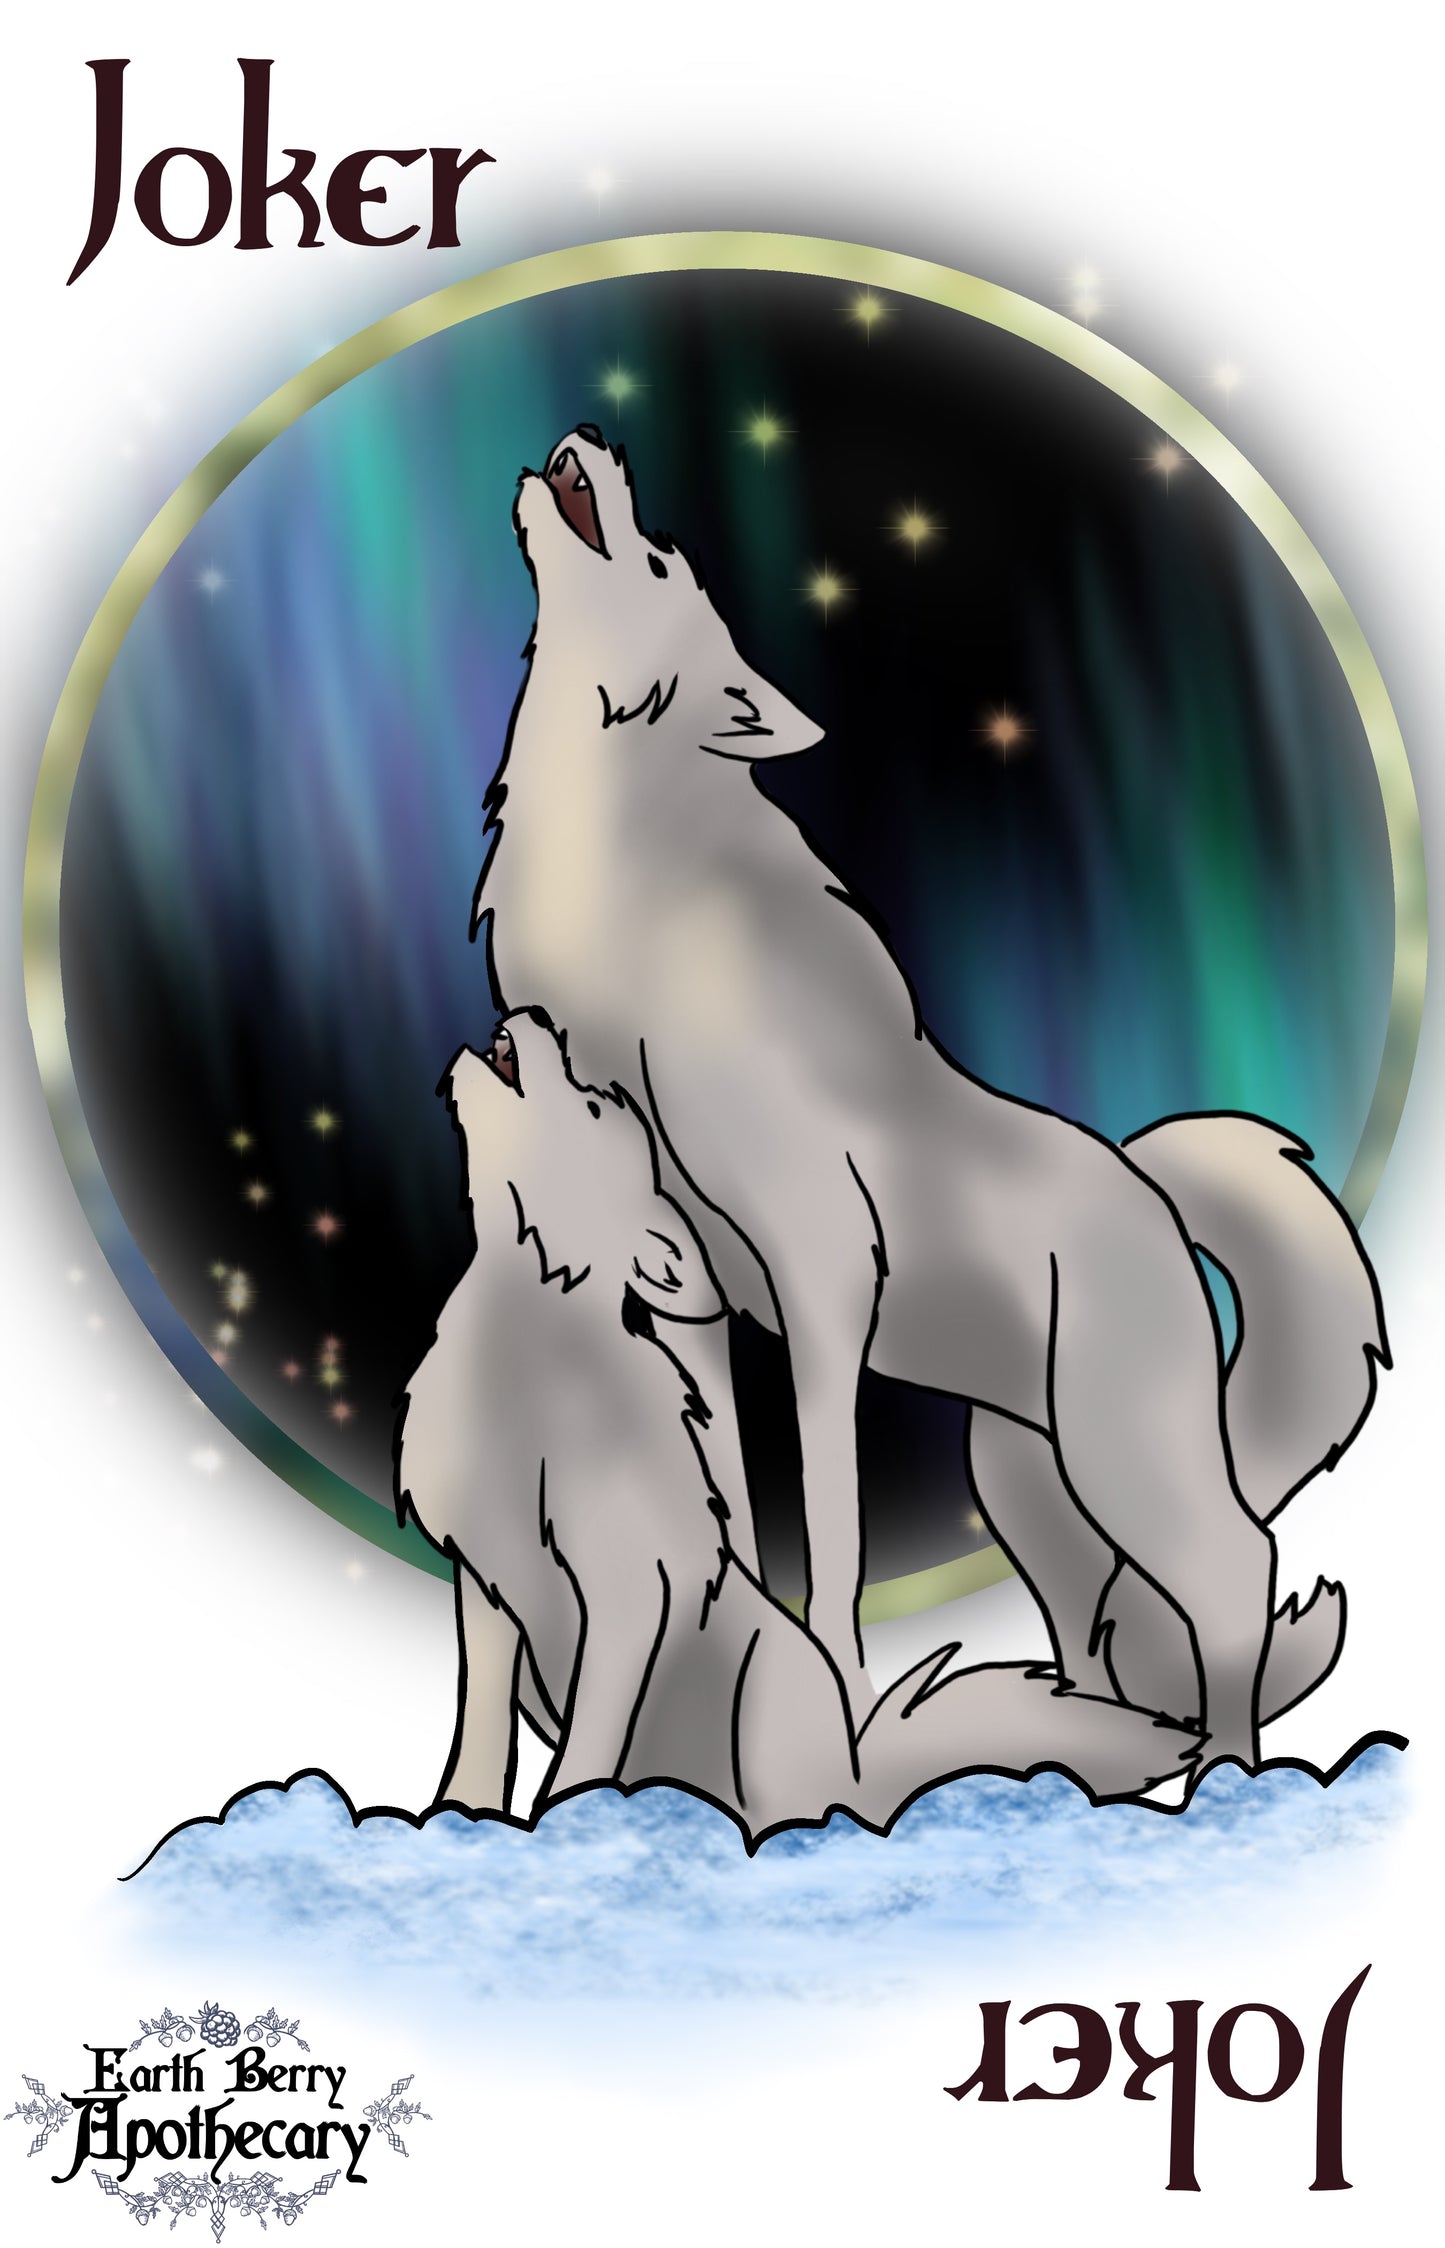 Fantasy themed playing cards. The other joker depicts 2 howling wolves. A mother wolf and her baby. Northern lights or Aurora borealis glow in a sky of stars behind them.